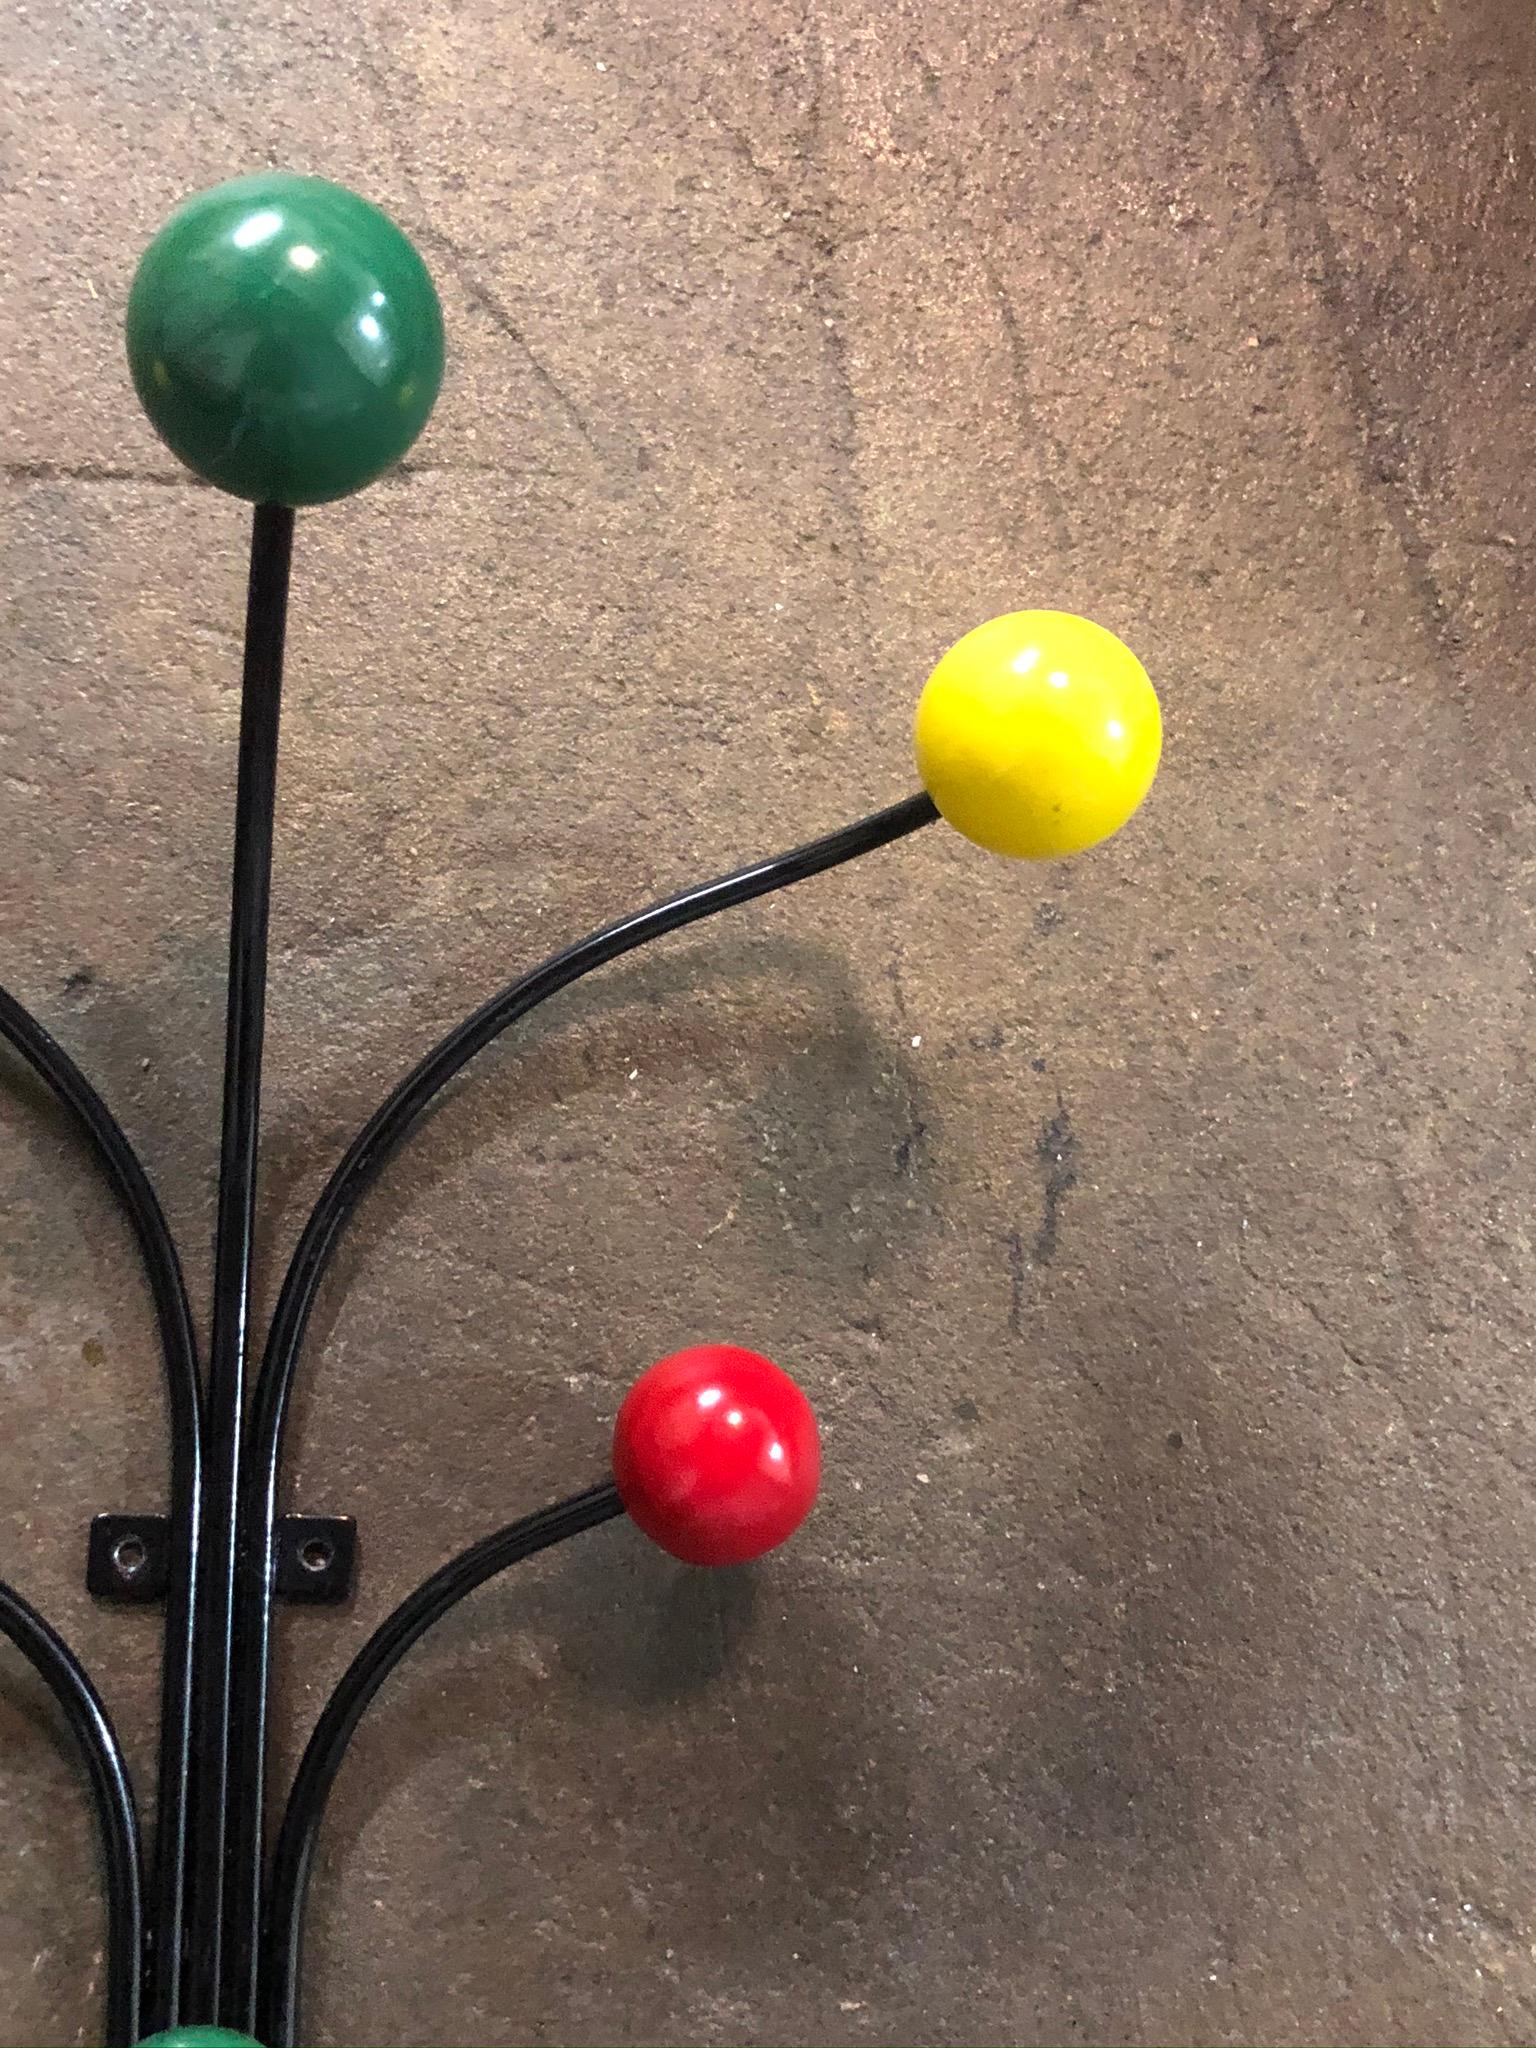 Beautiful decorative coat rack wall hanger. Black metal frame with colored accent wooden ball ends. Can support several coats and umbrellas. Looks just as good without anything on it!